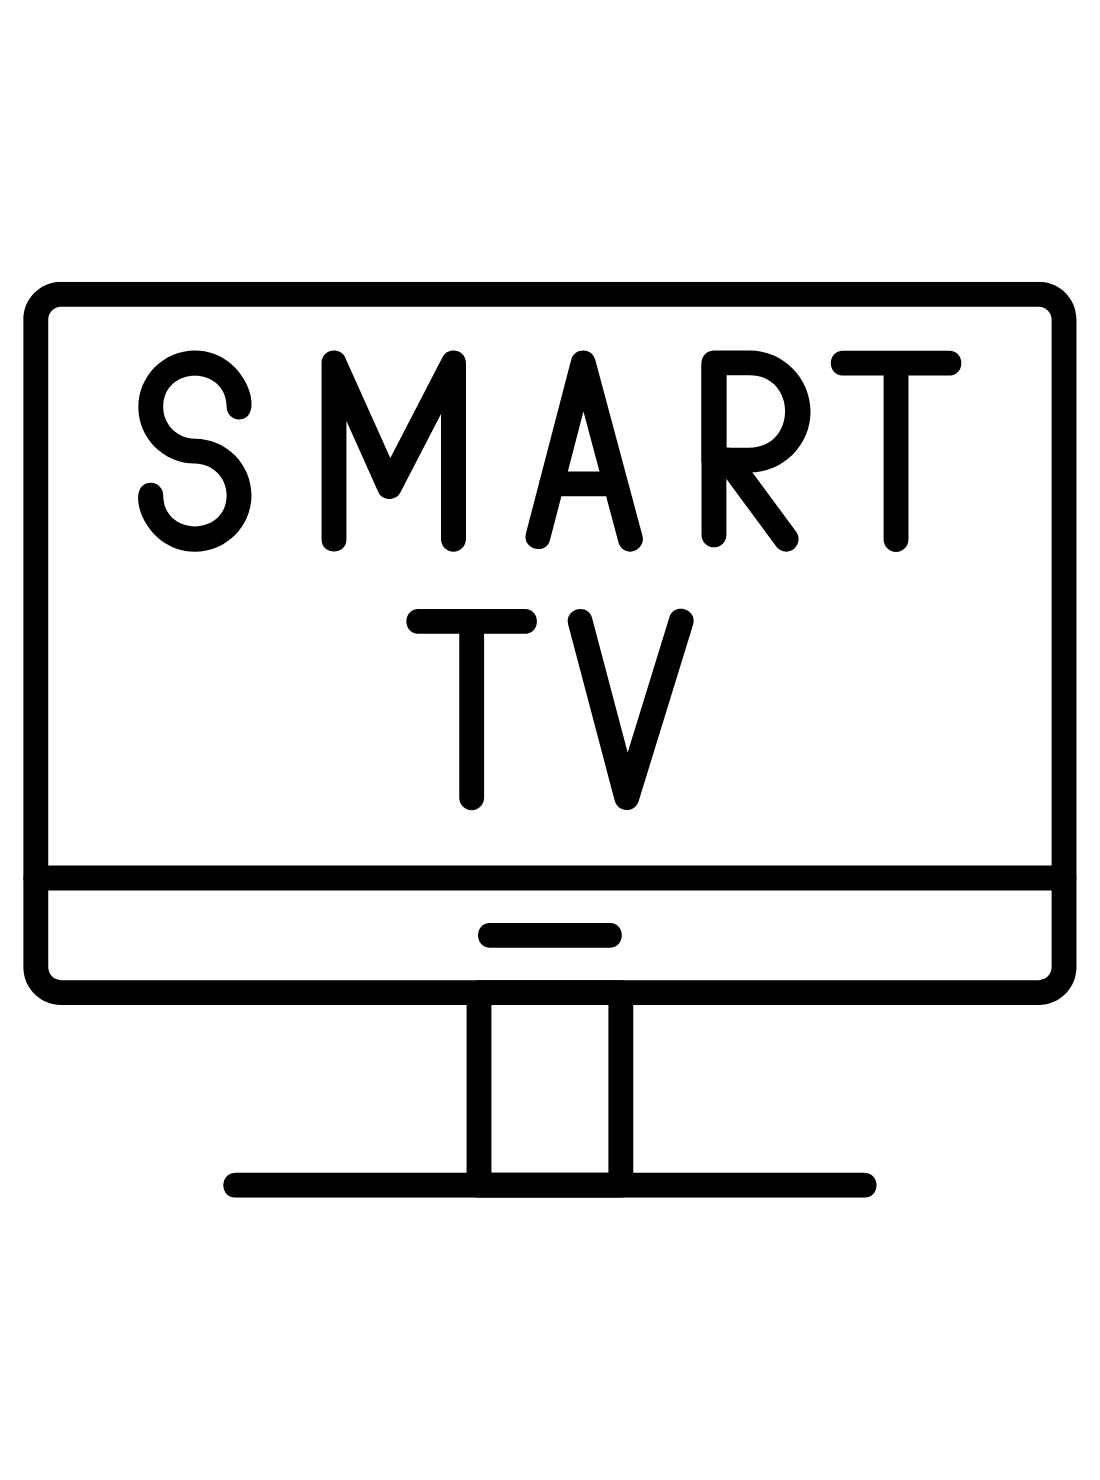 Smart Tv Image Coloring Pages